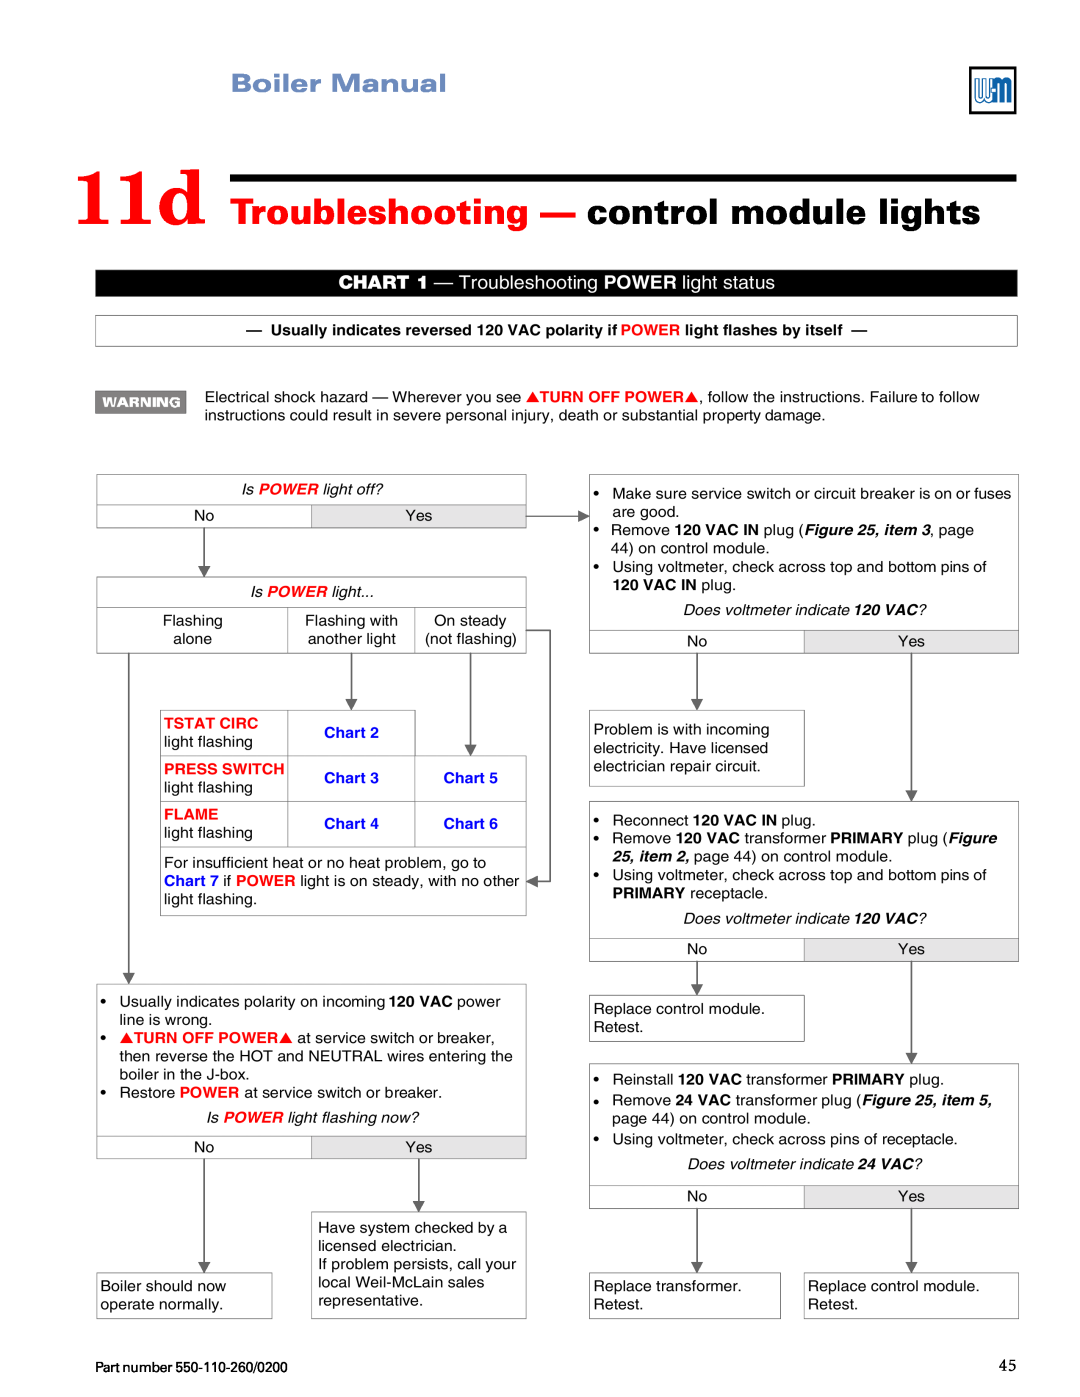 Weil-McLain 550-110-260/02002 manual 11d Troubleshooting — control module lights, Boiler Manual, Is POWER light off?, Chart 